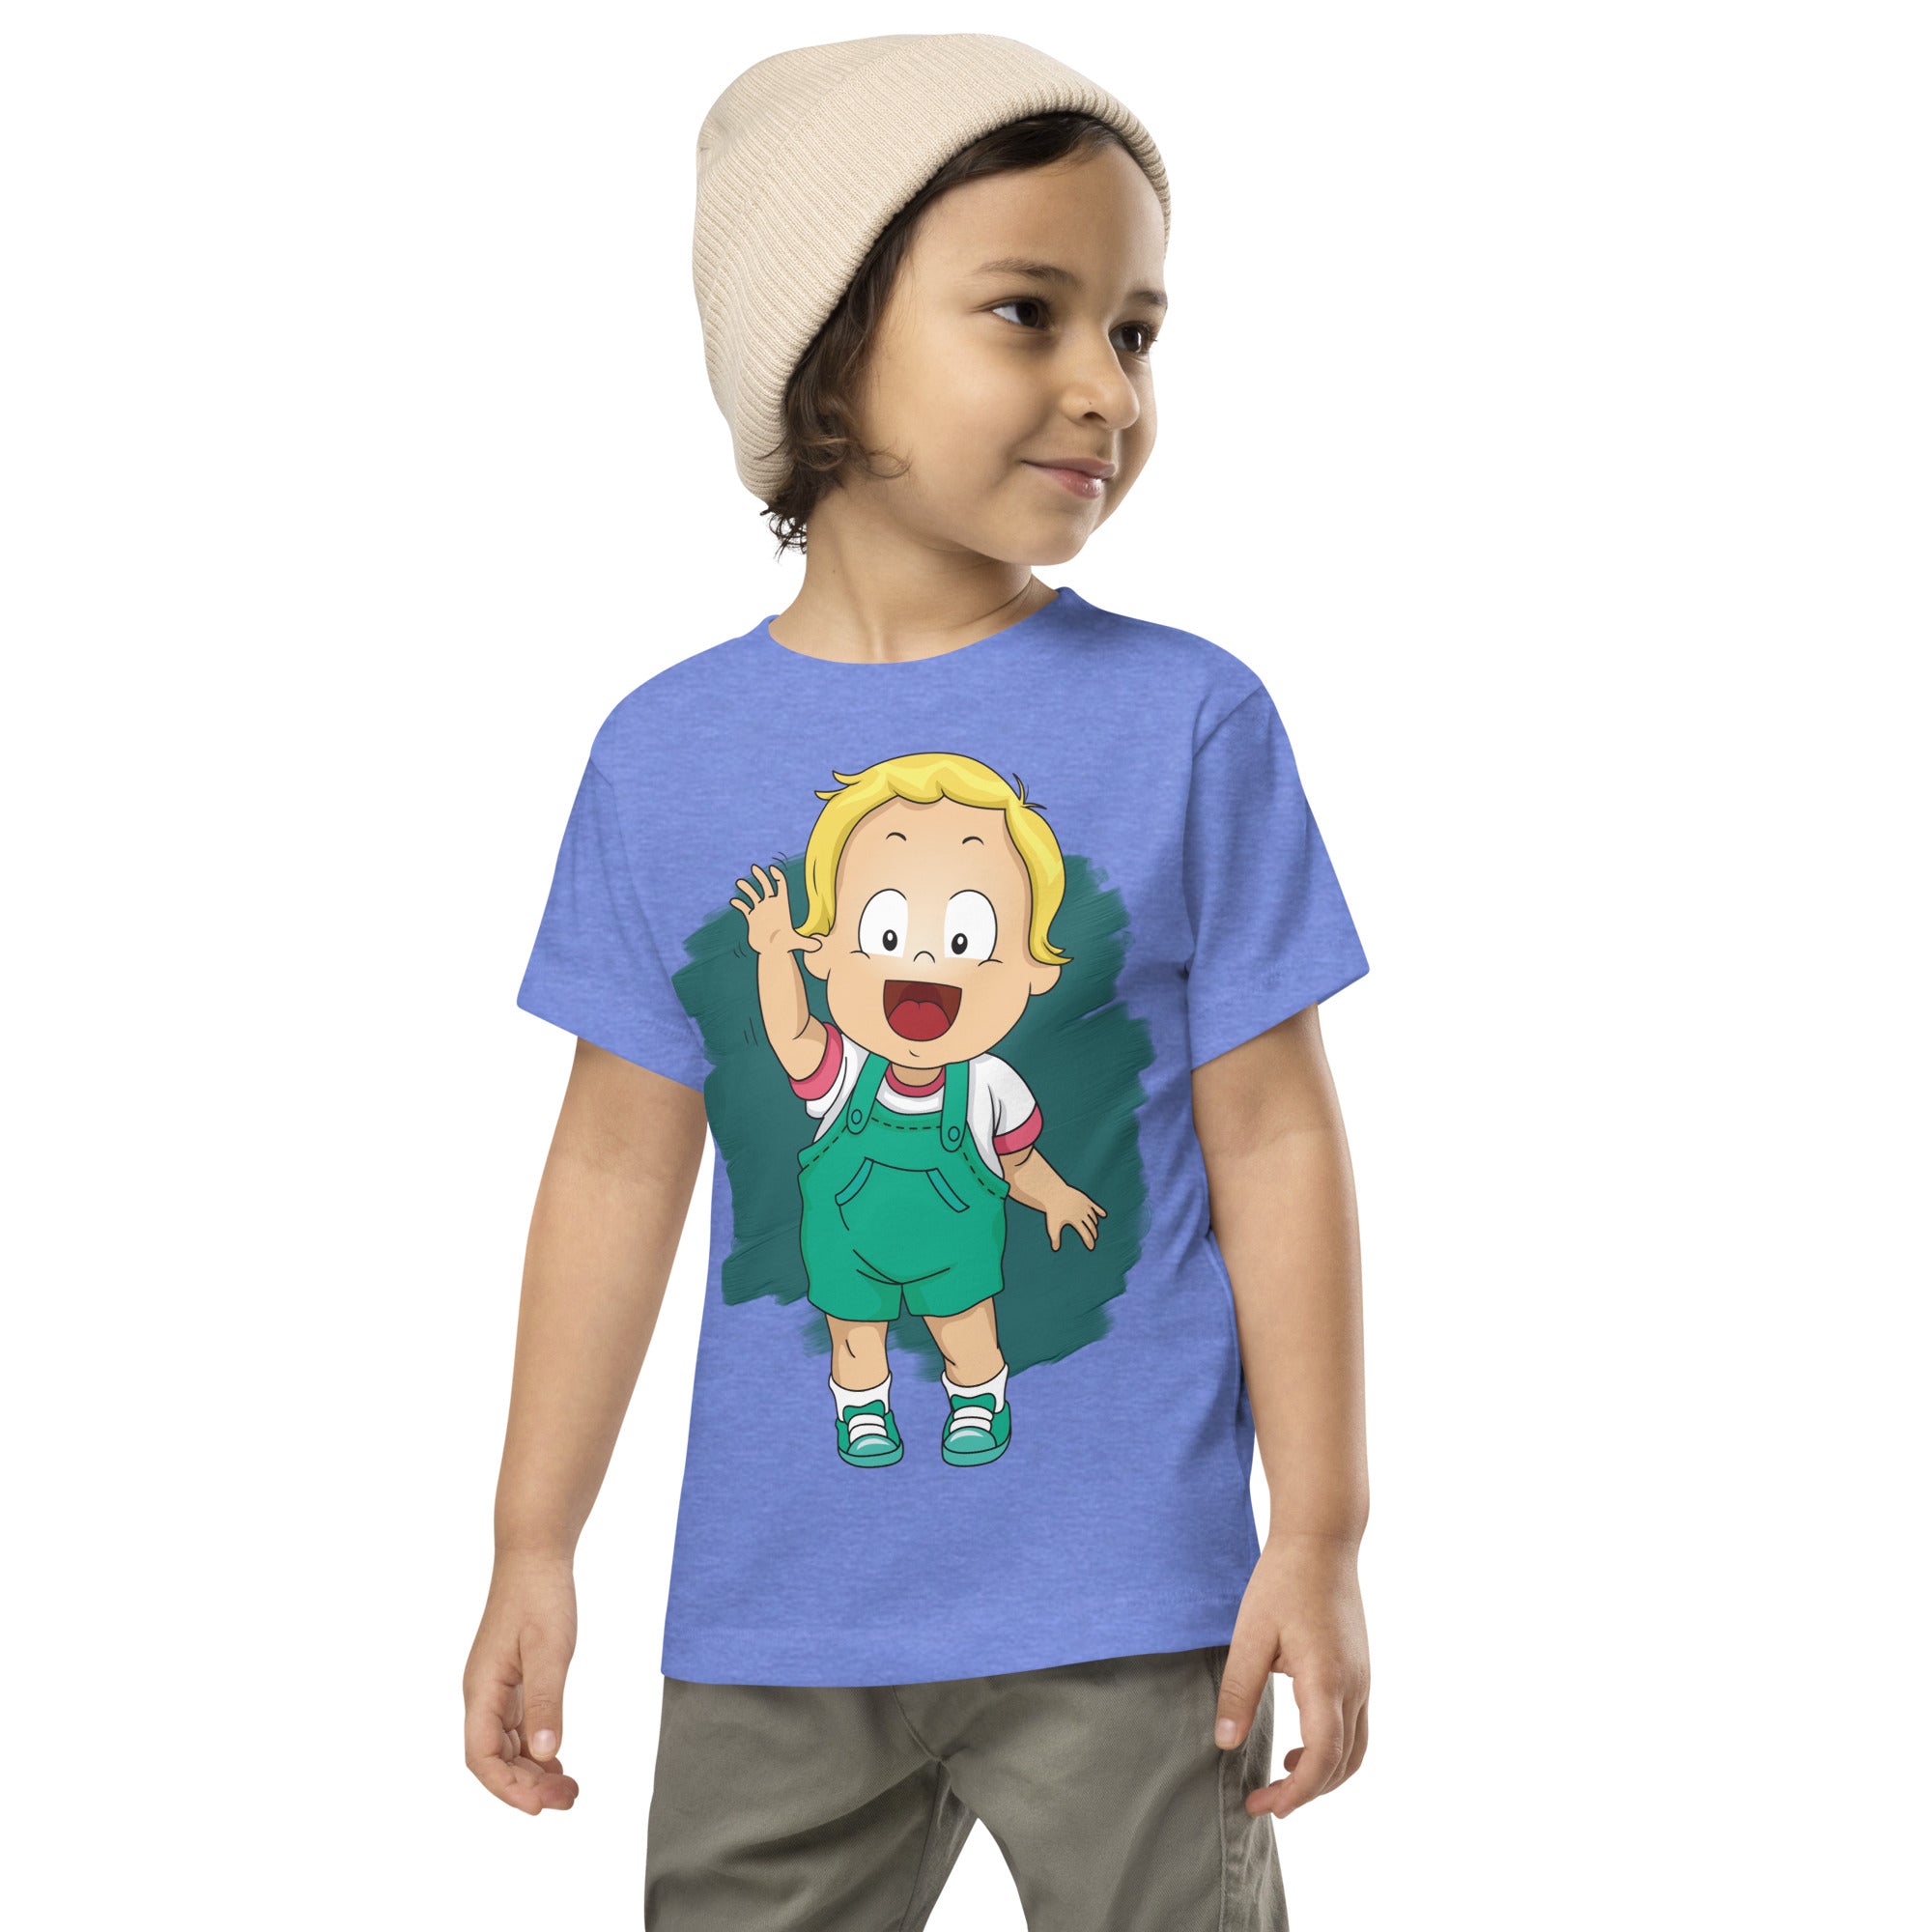 Toddler Short Sleeve Tee - Wave (Colors)